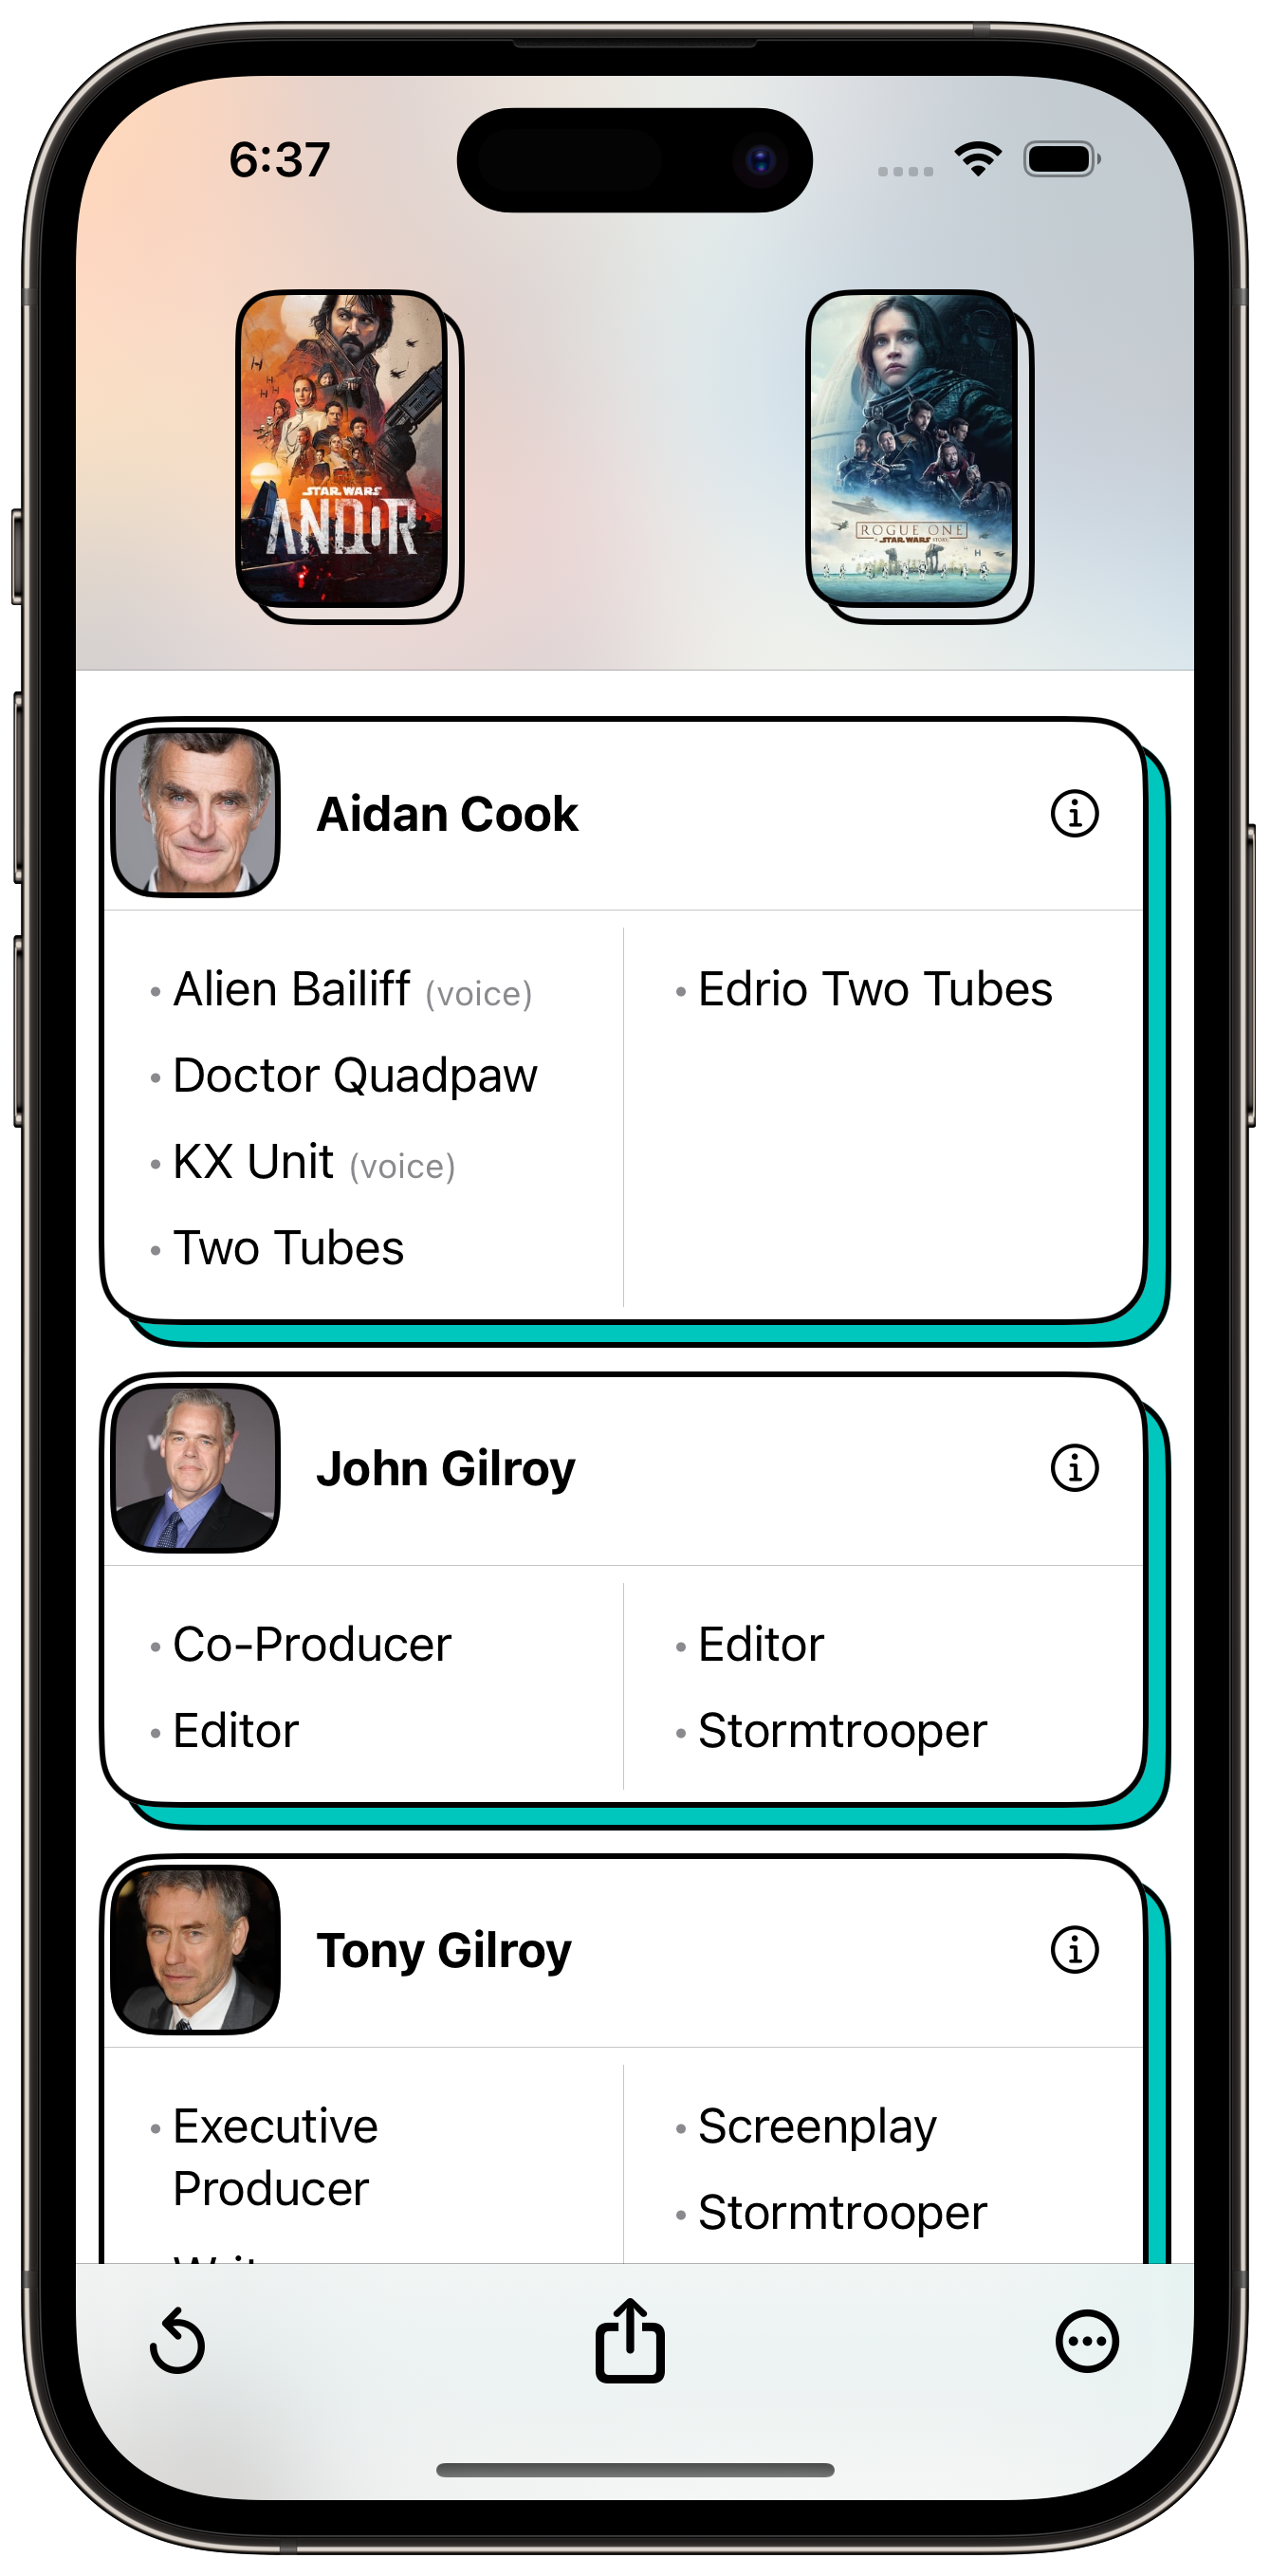 Screenshot of ScreenCred app showing the common cast and crew between the show Andor and the movie Rogue One, with rounded square profile images of the person. The image has a black border around it.